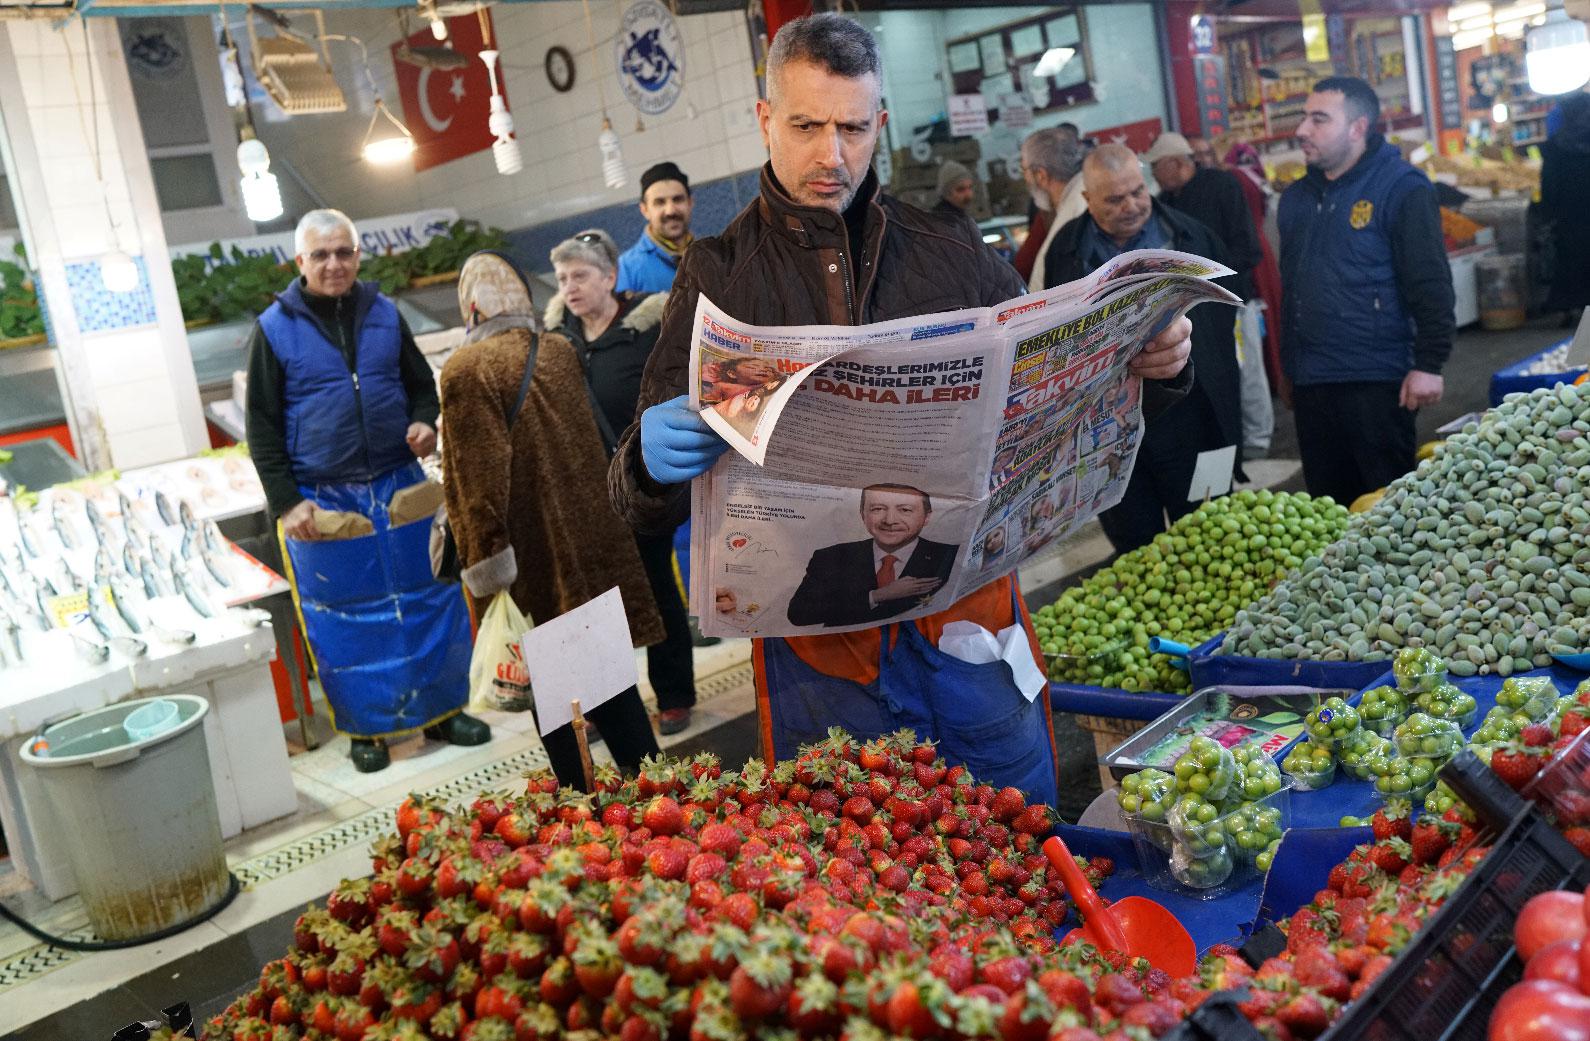 A stallholder reads a newspaper as he waits for customers at a bazaar in Ankara, Turkey, March 26, 2019.